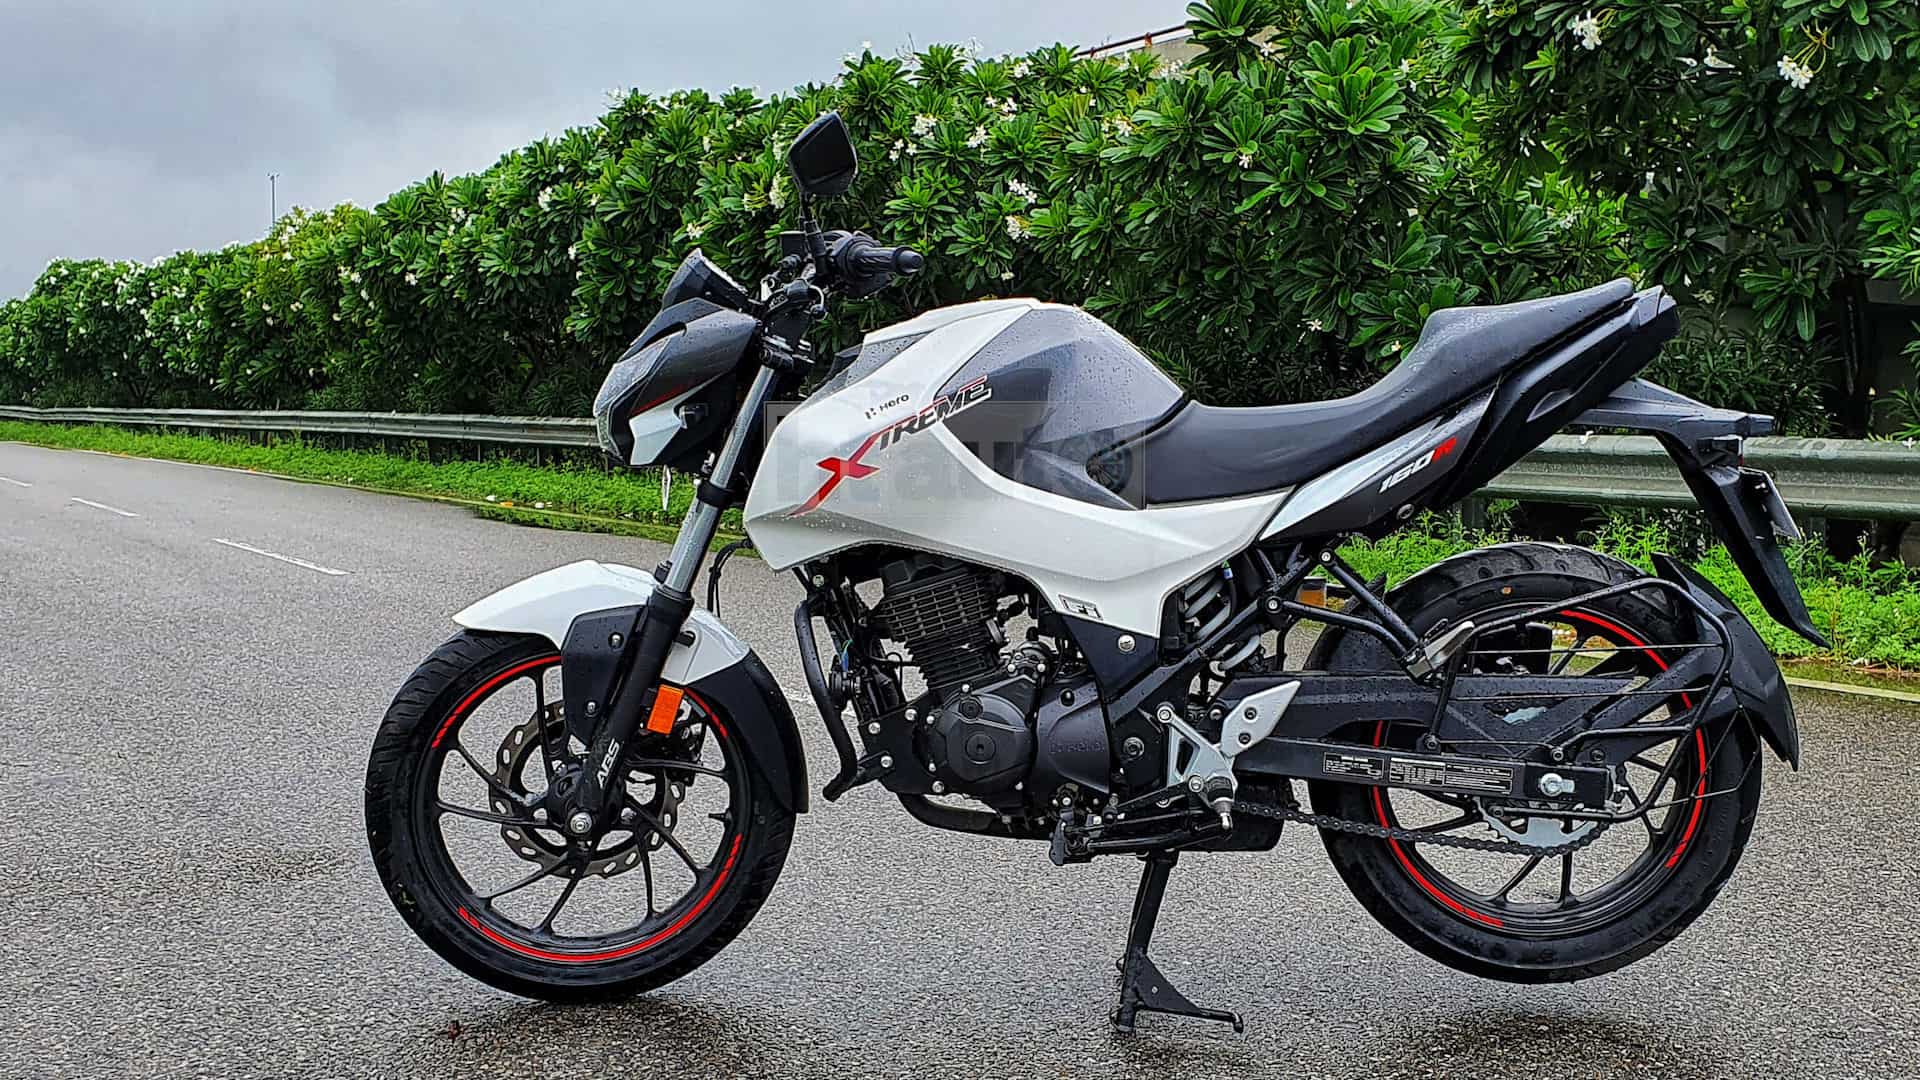 Read Price And Features Of Newly Launched Hero Xtreme 160r Stealth Edition Live Uttar Pradesh